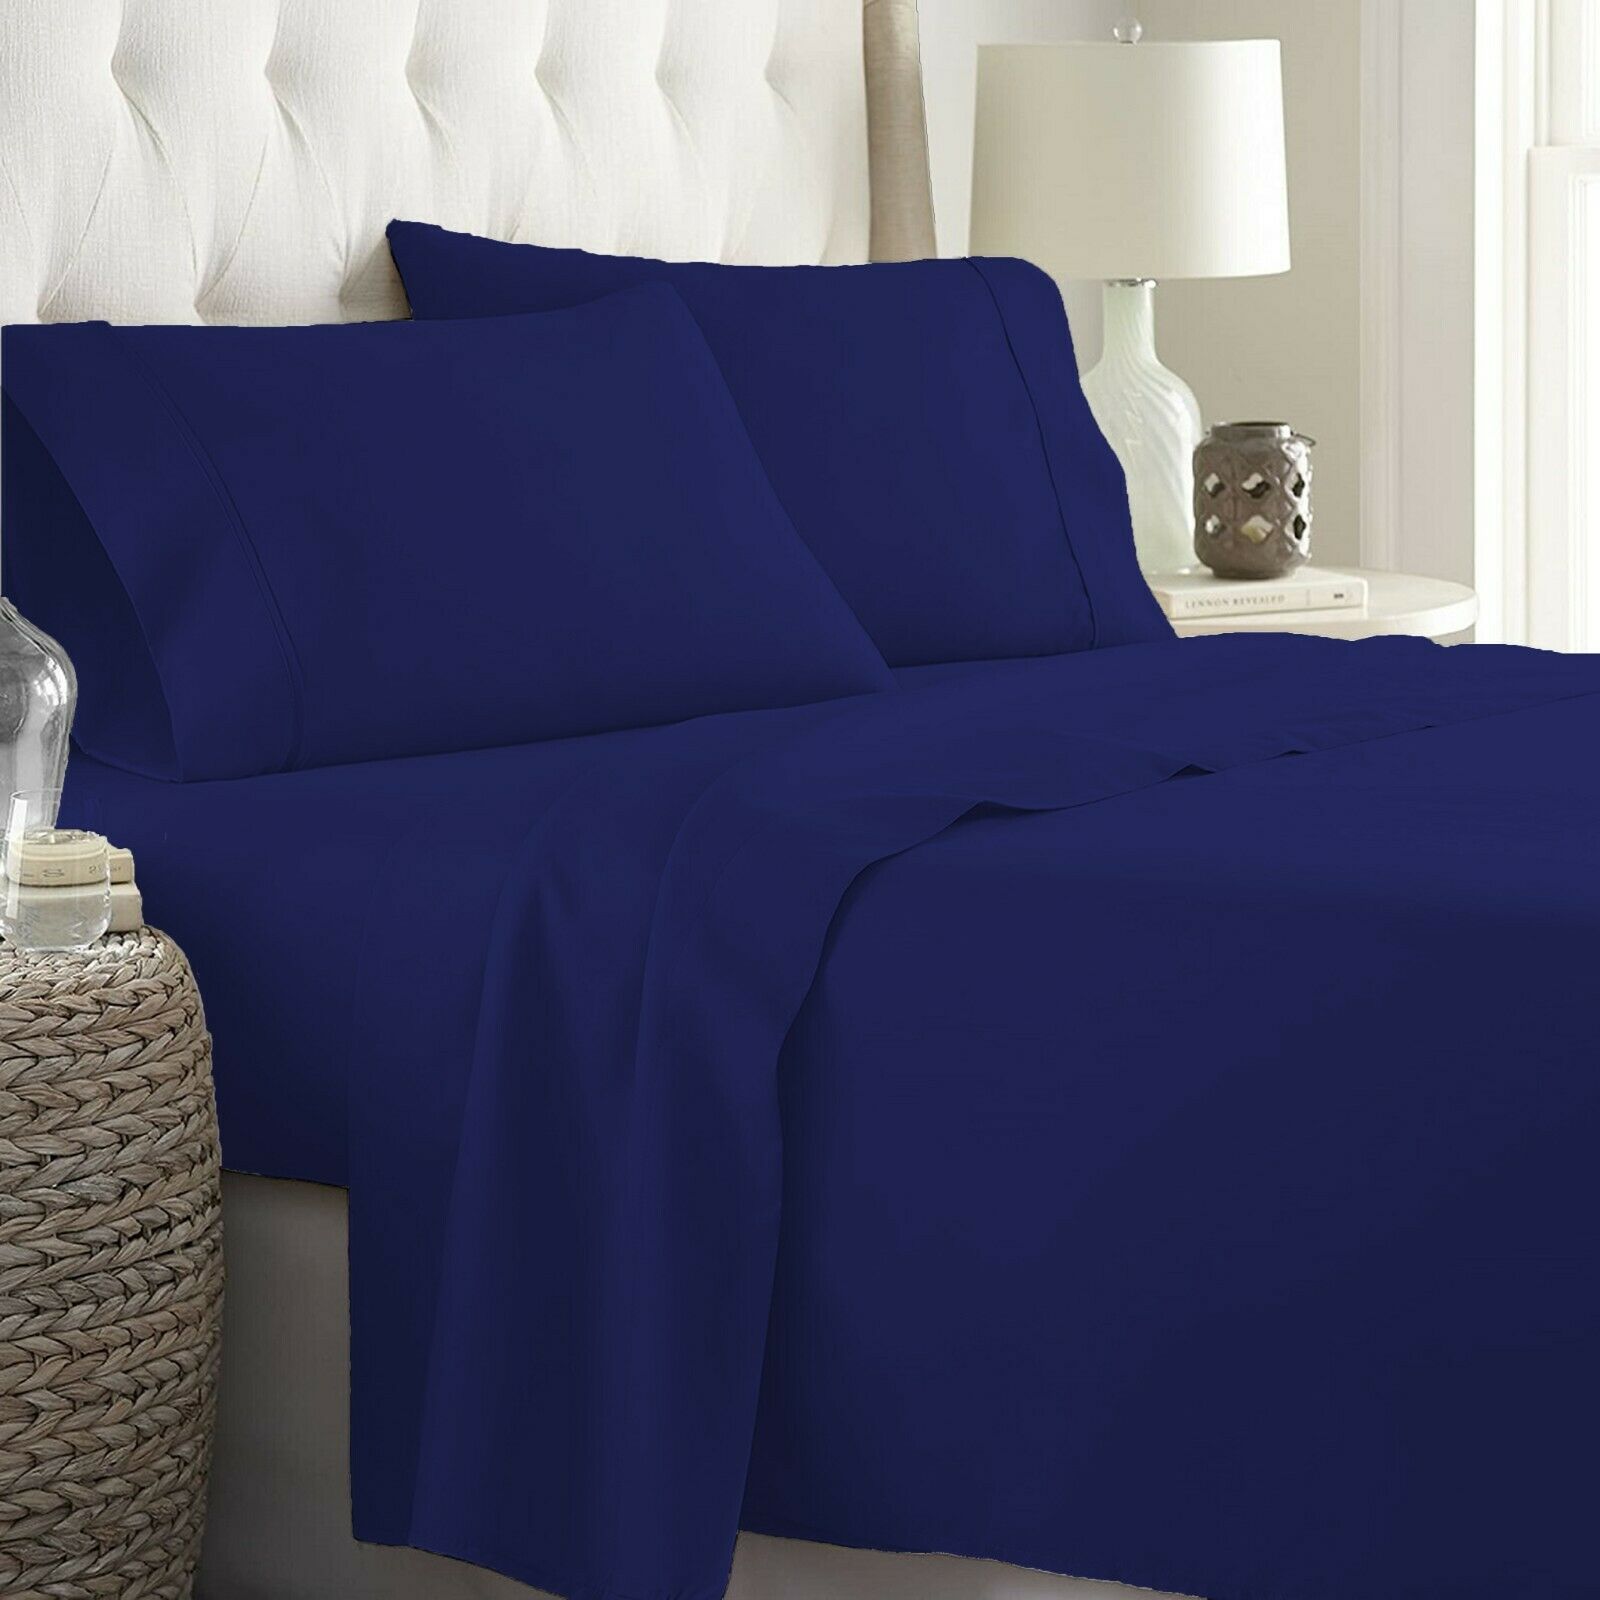 Buy Calking Size Flat Sheet Navy Blue Egyptian Cotton 1000 Thread Count at- Egyptianhomelinens.com